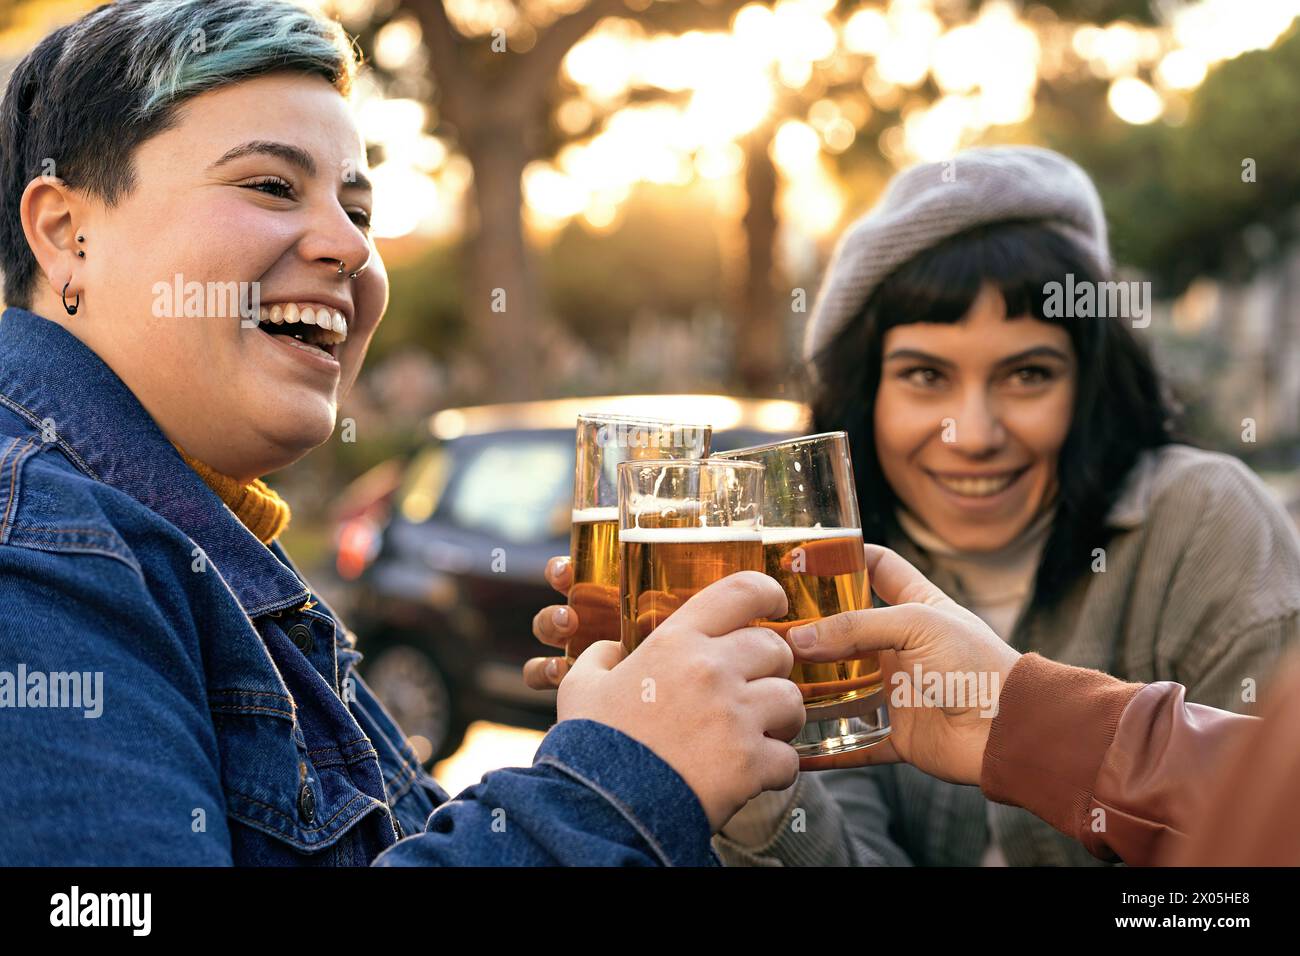 Non-binary or Gender-fluid person with a curvy figure shares a cheerful toast with a friend, smiling, during a relaxed outdoor gathering at golden hou Stock Photo